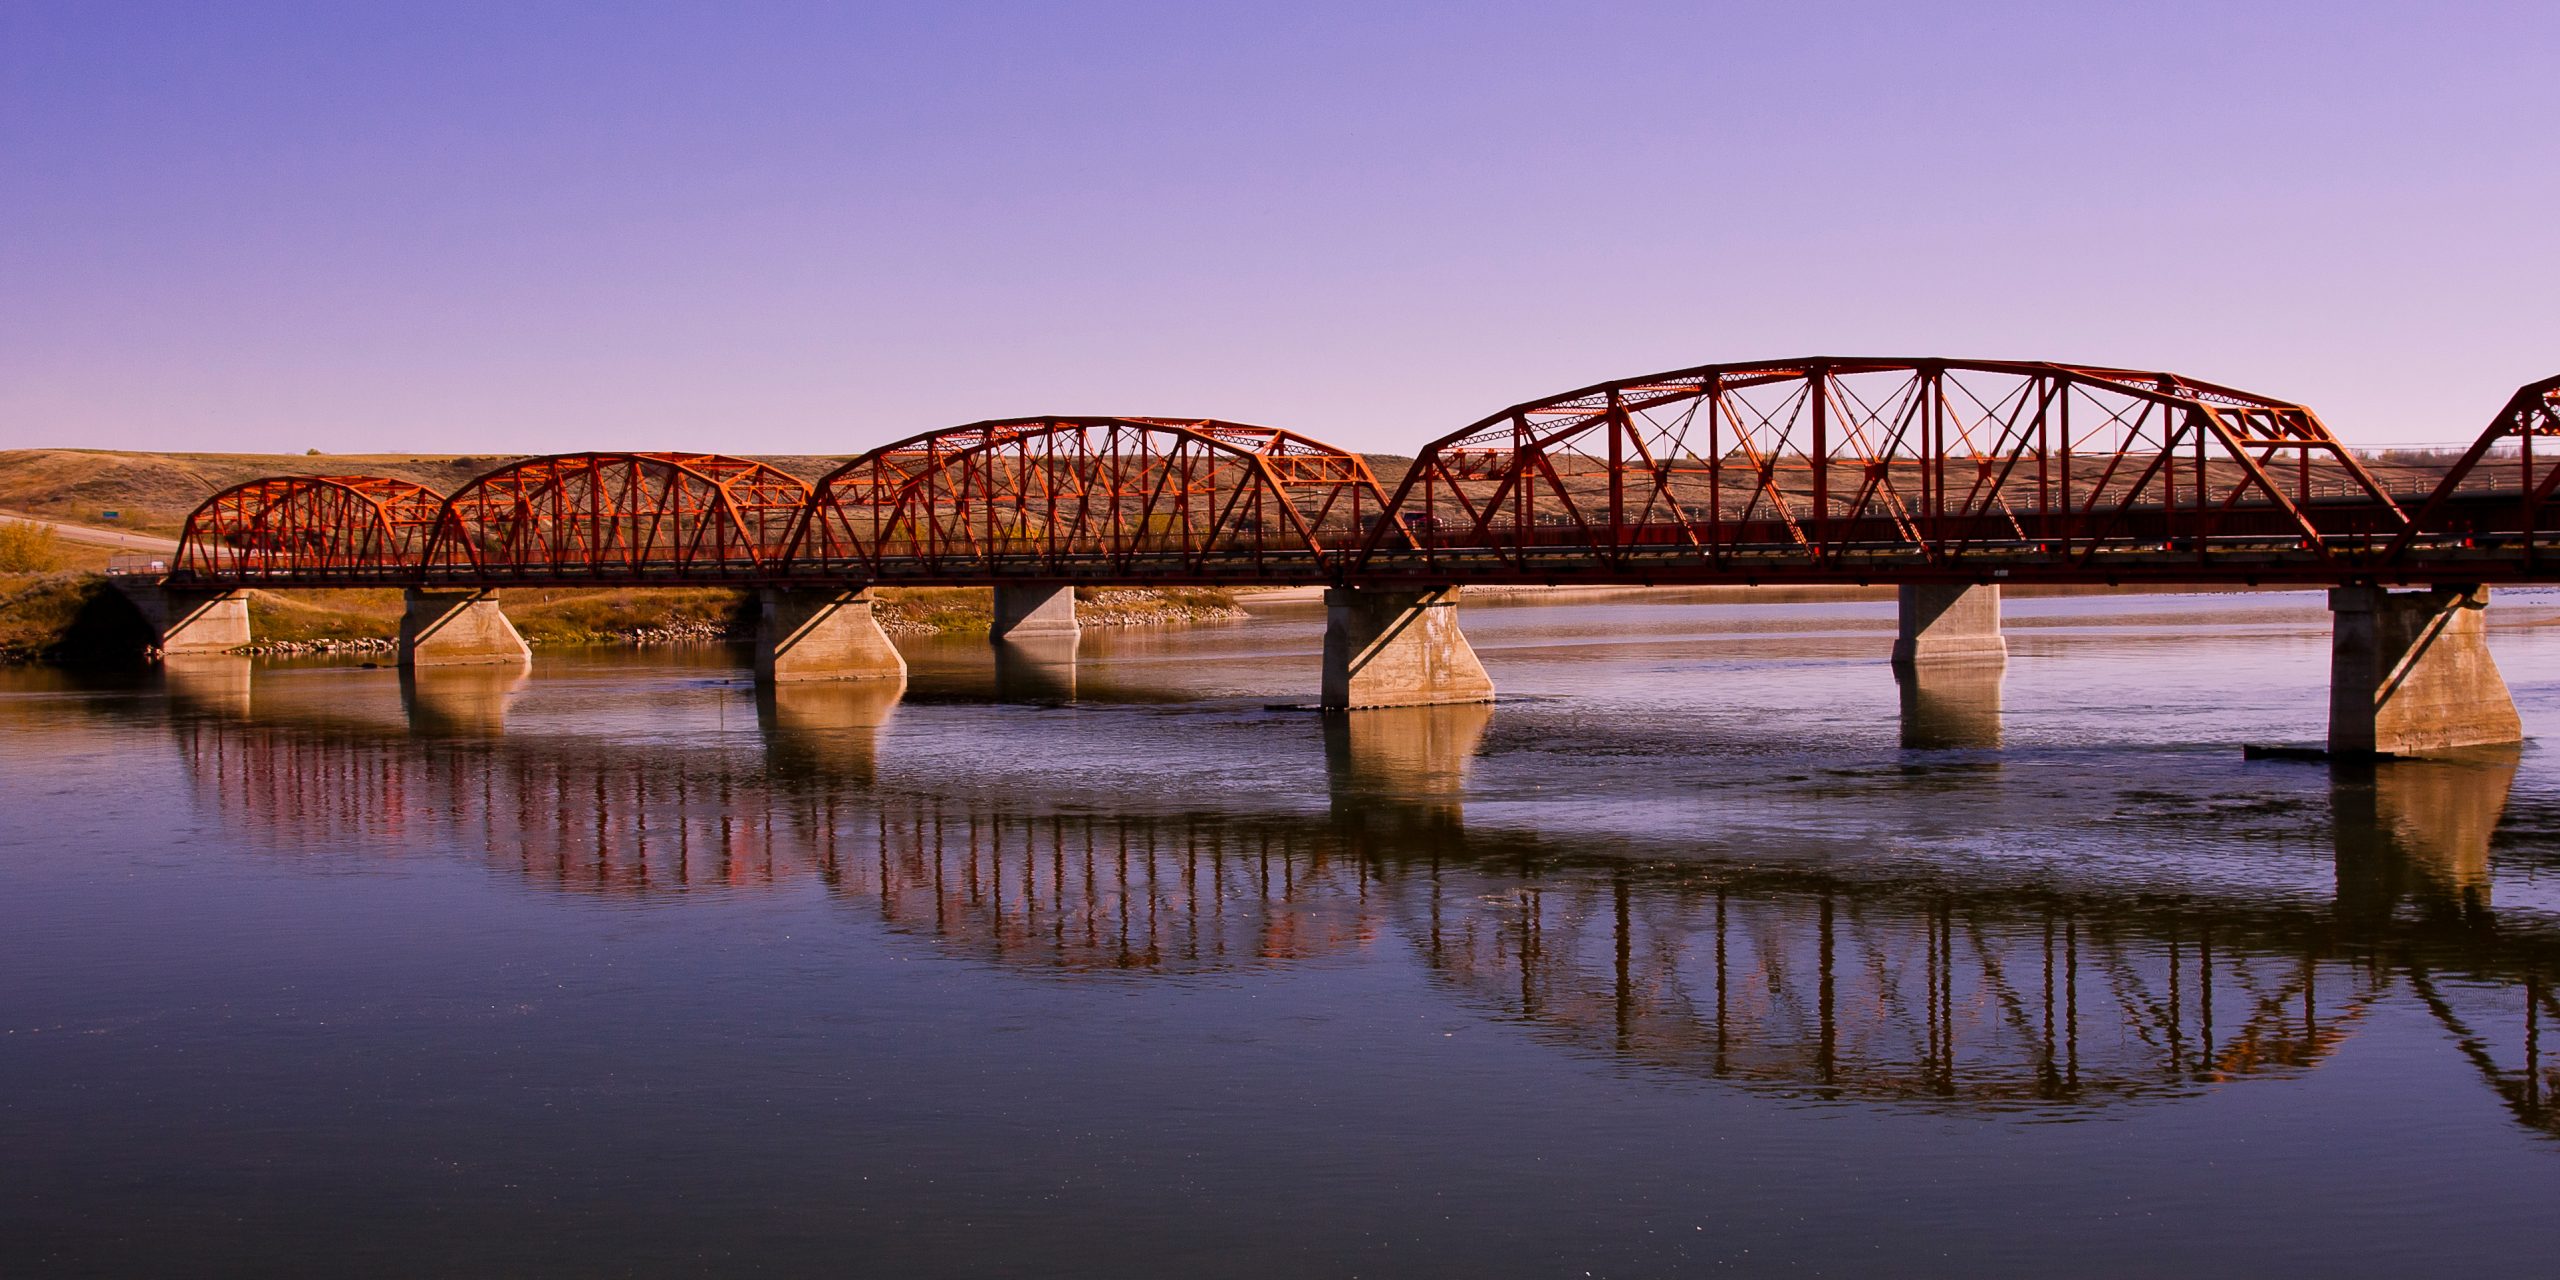 Old red bridge over the calm waters of the Saskatchewan River near Outlook on the Canadian Prairies.